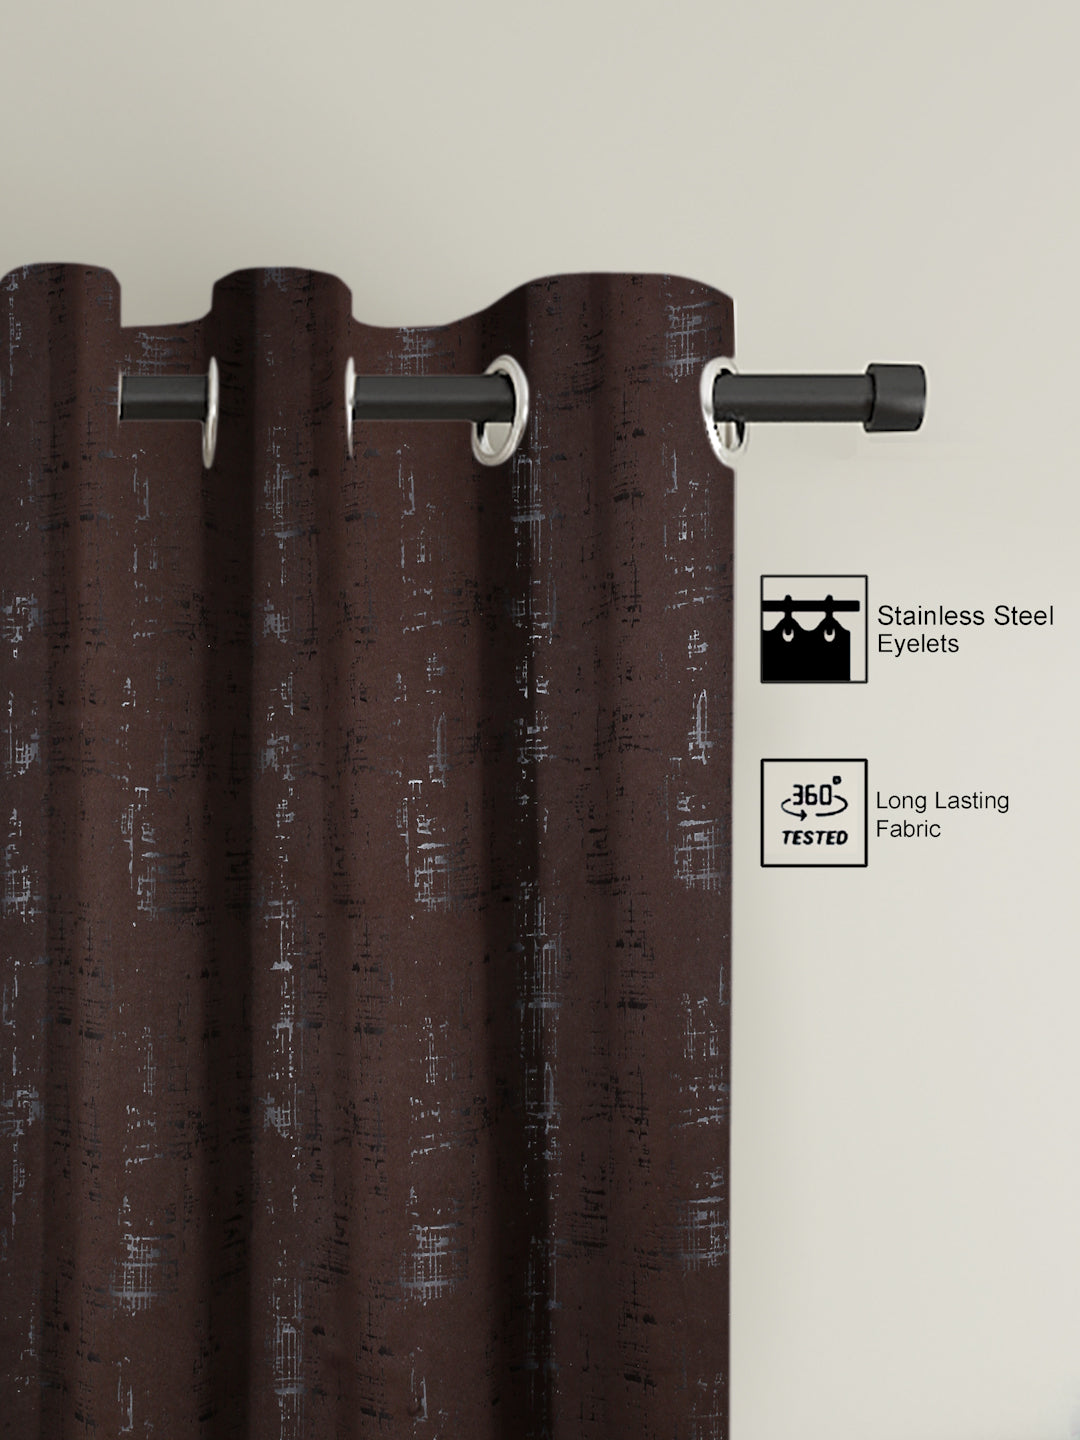 Pack of 2 Polyester Blackout Emboss Long Door Curtains- Brown